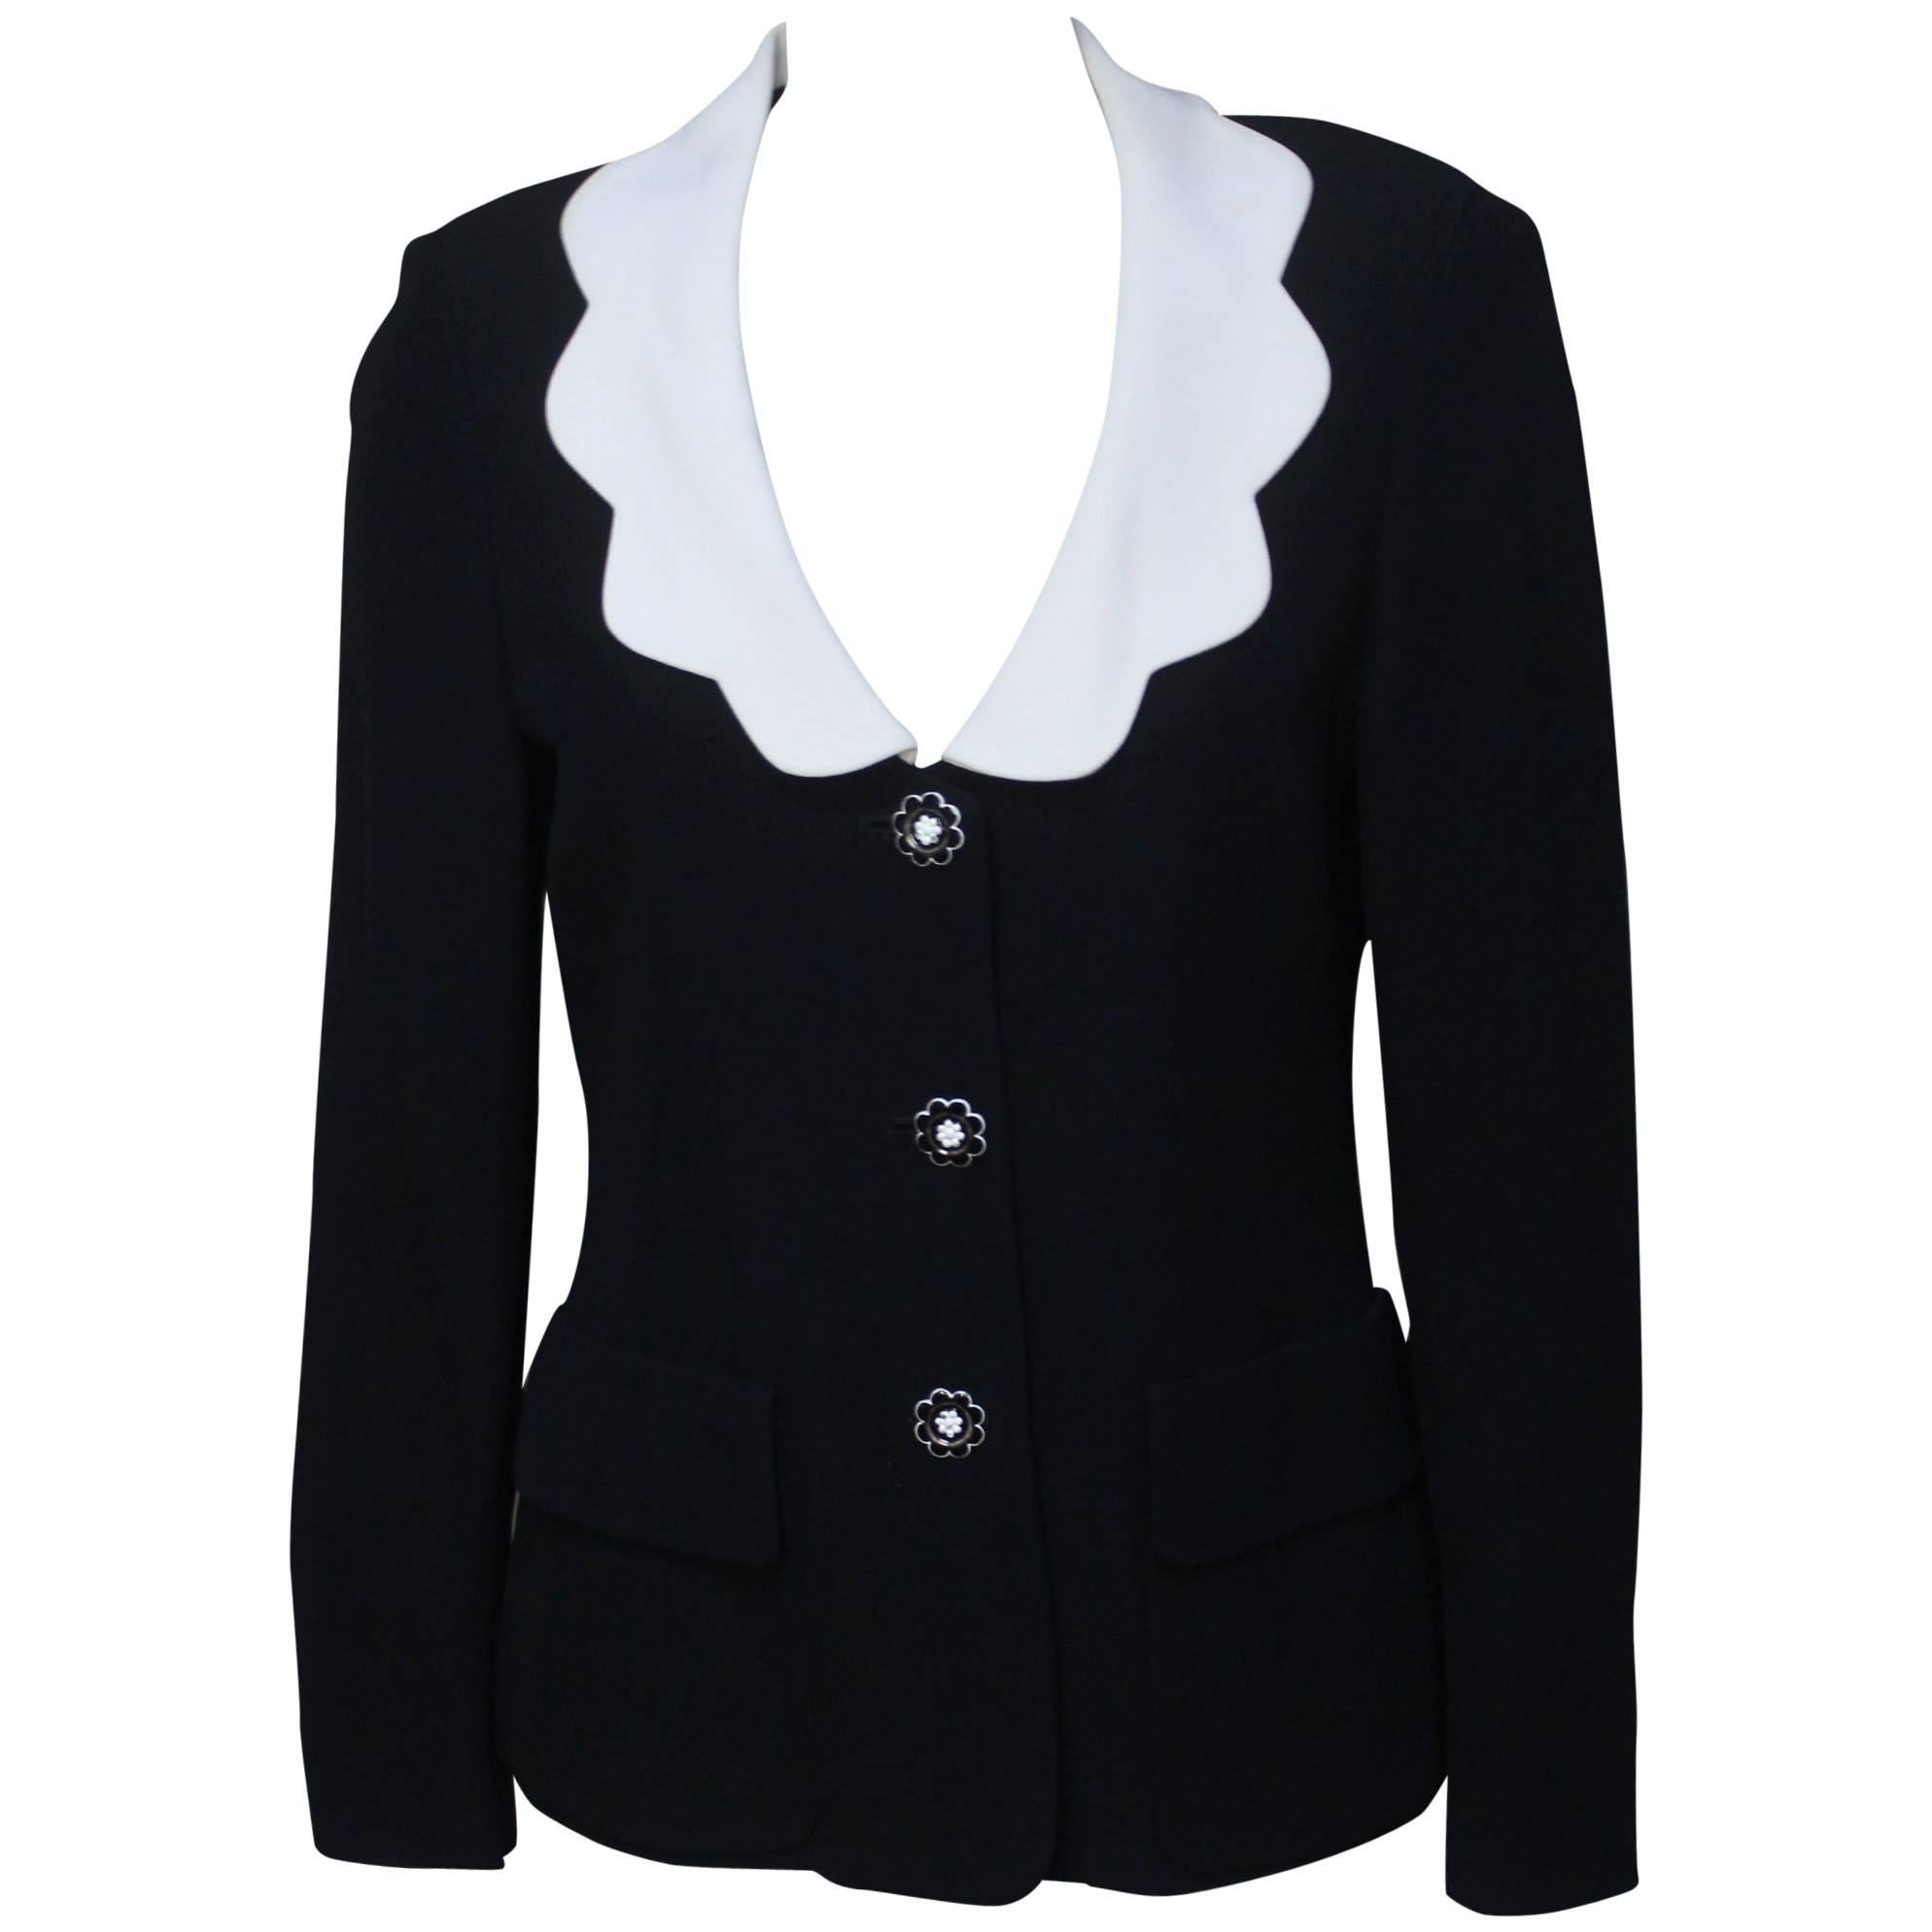 Moschino Scalloped Collar Jacket with Daisy Buttons For Sale